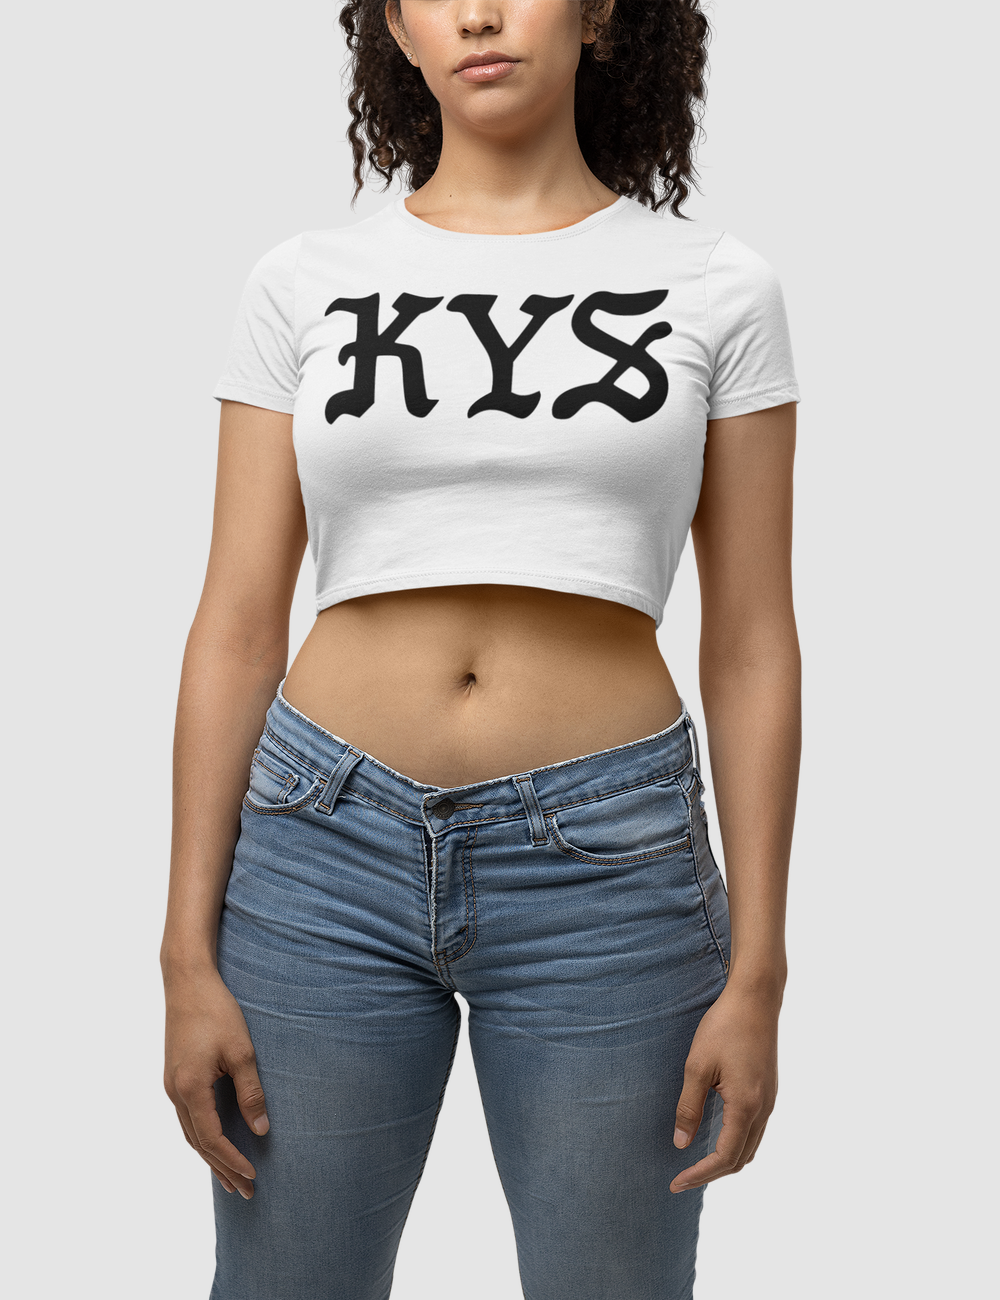 KYS Women's Fitted Crop Top T-Shirt OniTakai